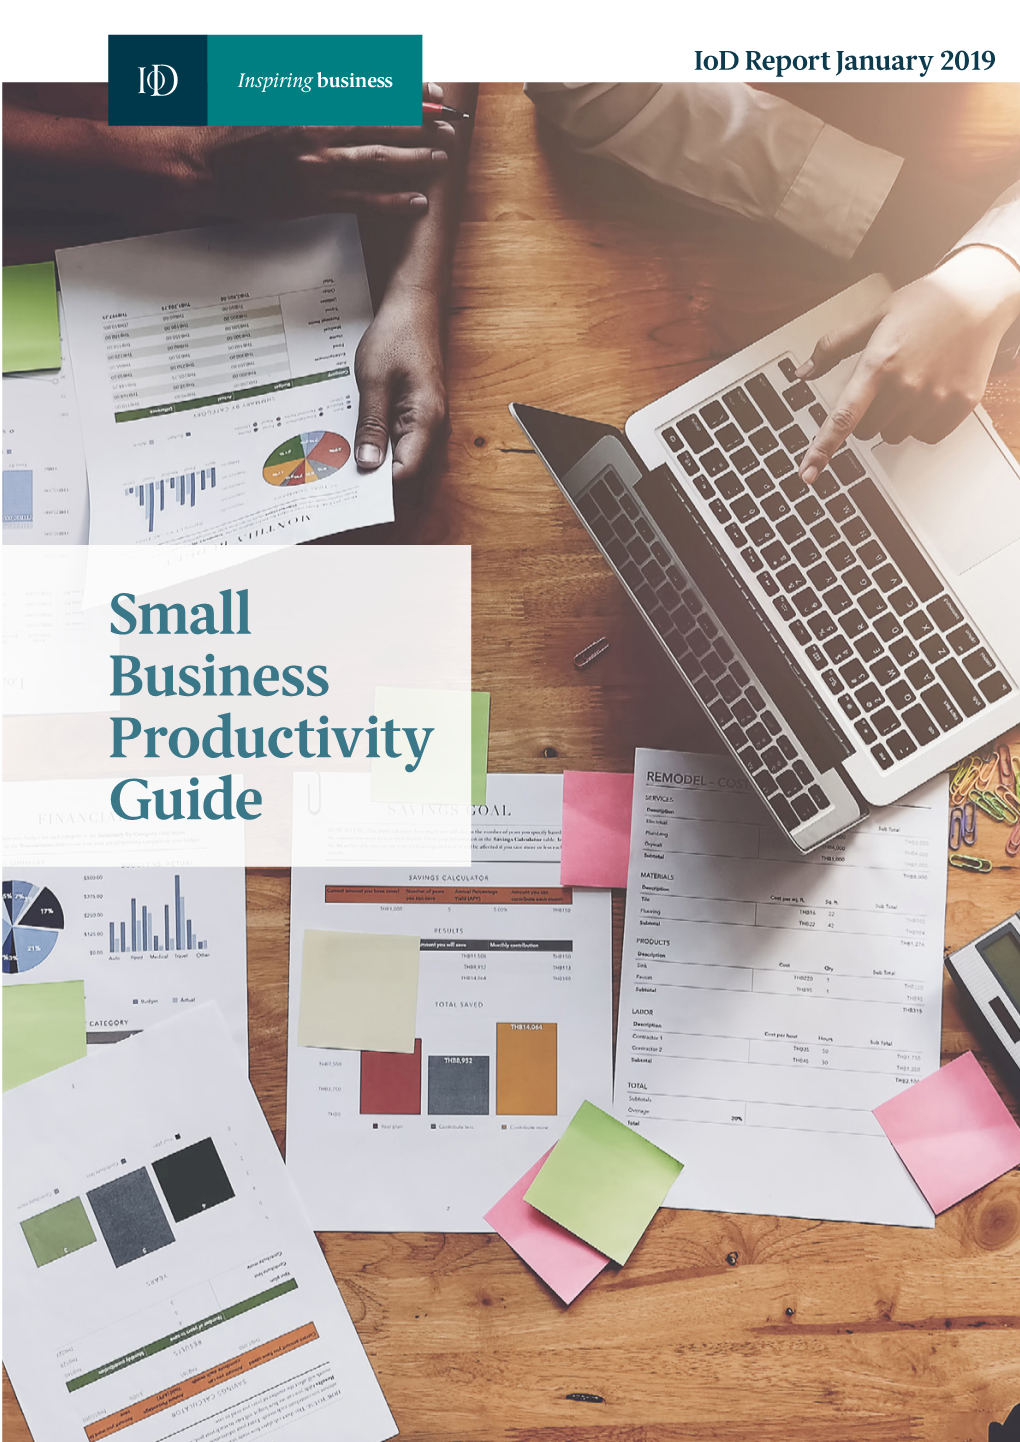 Small Business Productivity Guide Small Business Productivity Guide